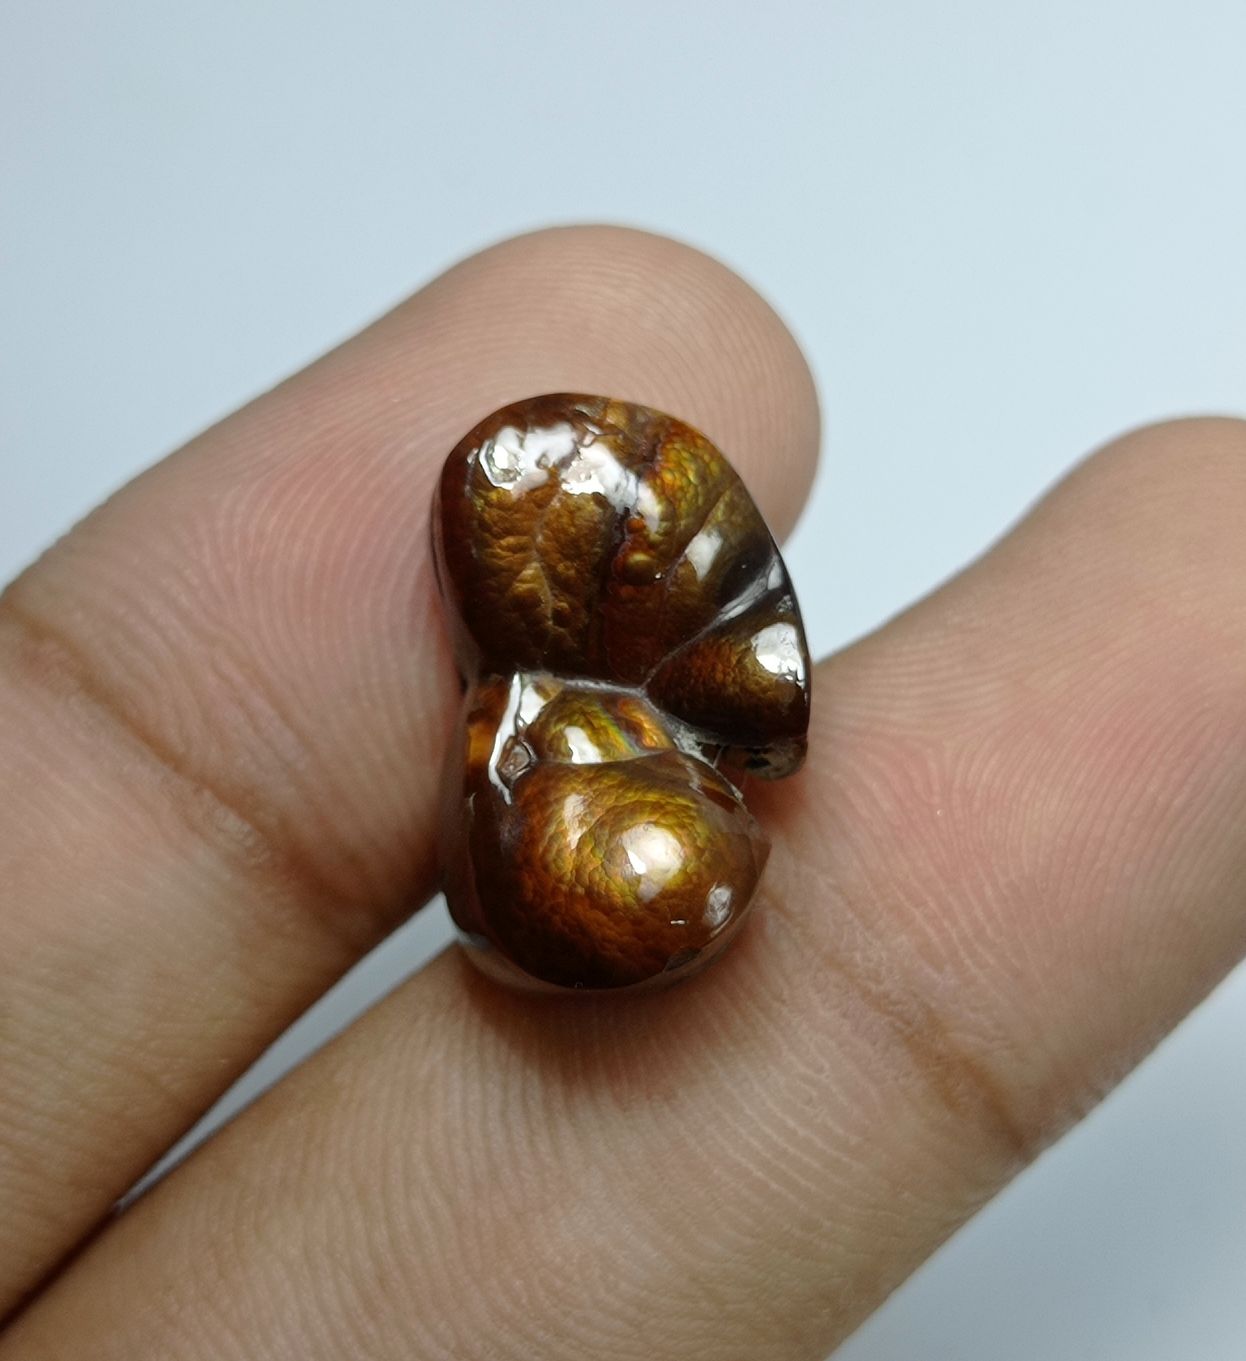 15.4ct Natural Mexican Fire Agate - Dimensions 20x12x8mm